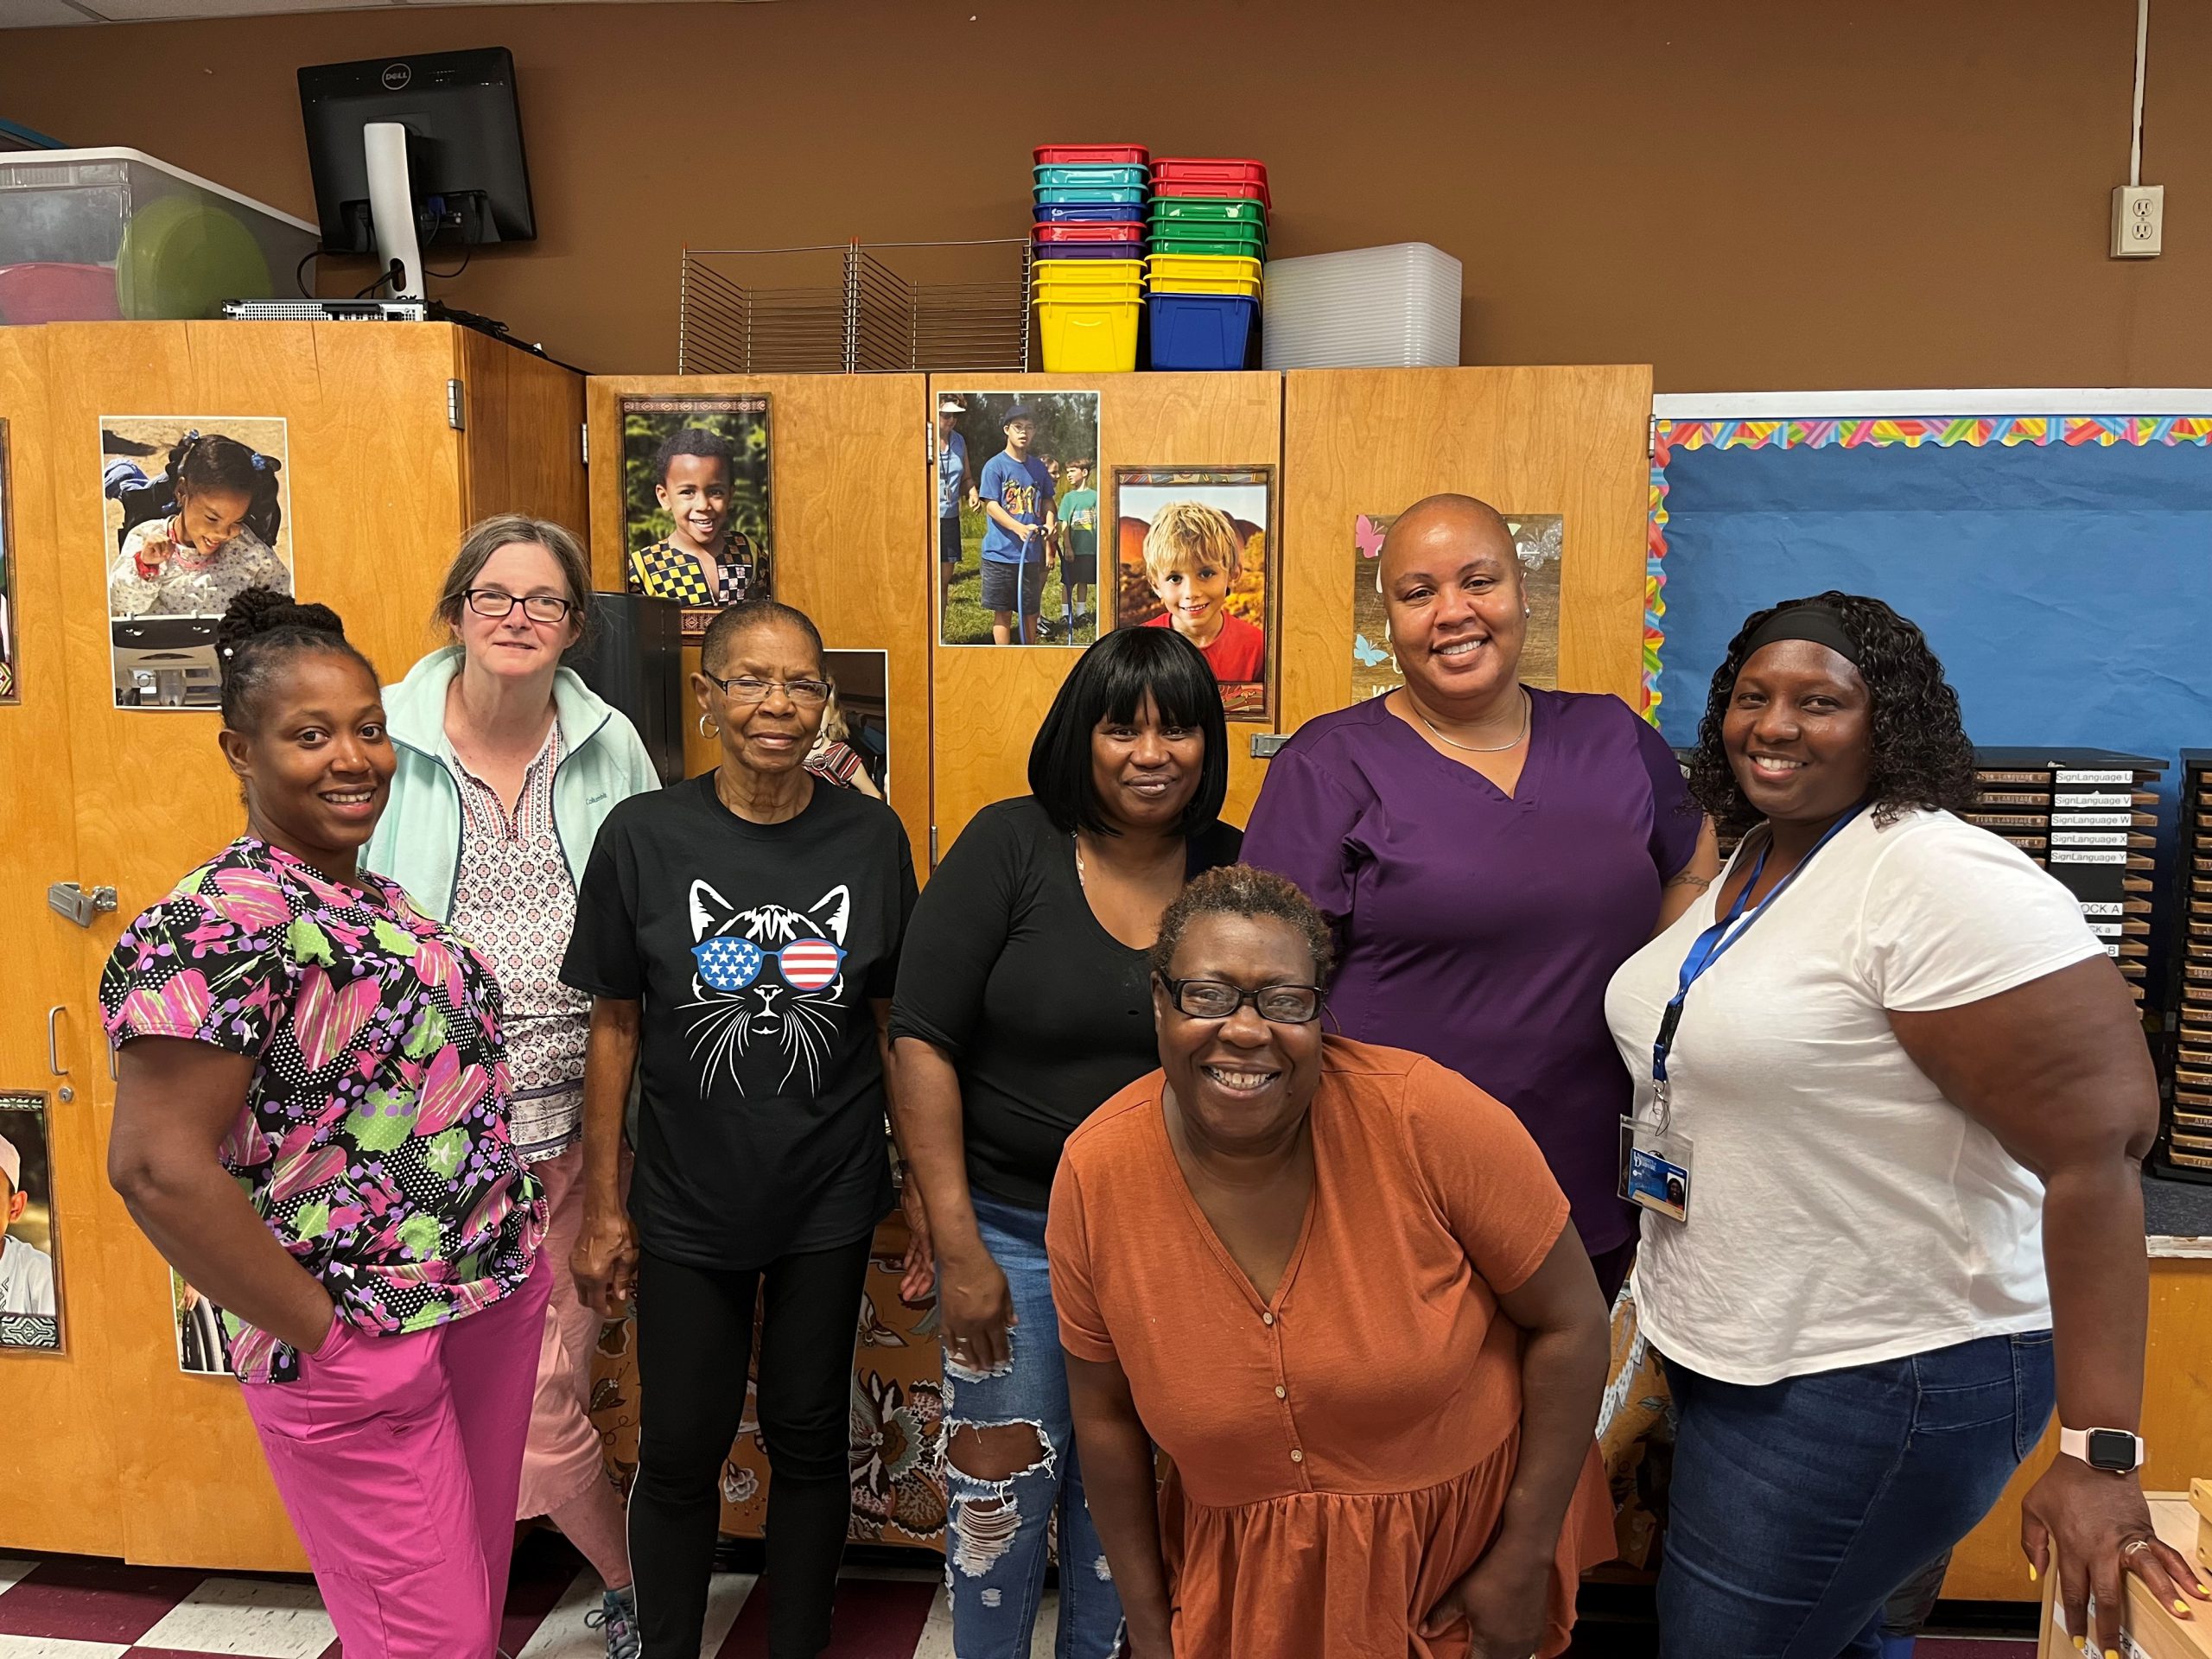 Group of teachers poses in a classroom in front of storage closets